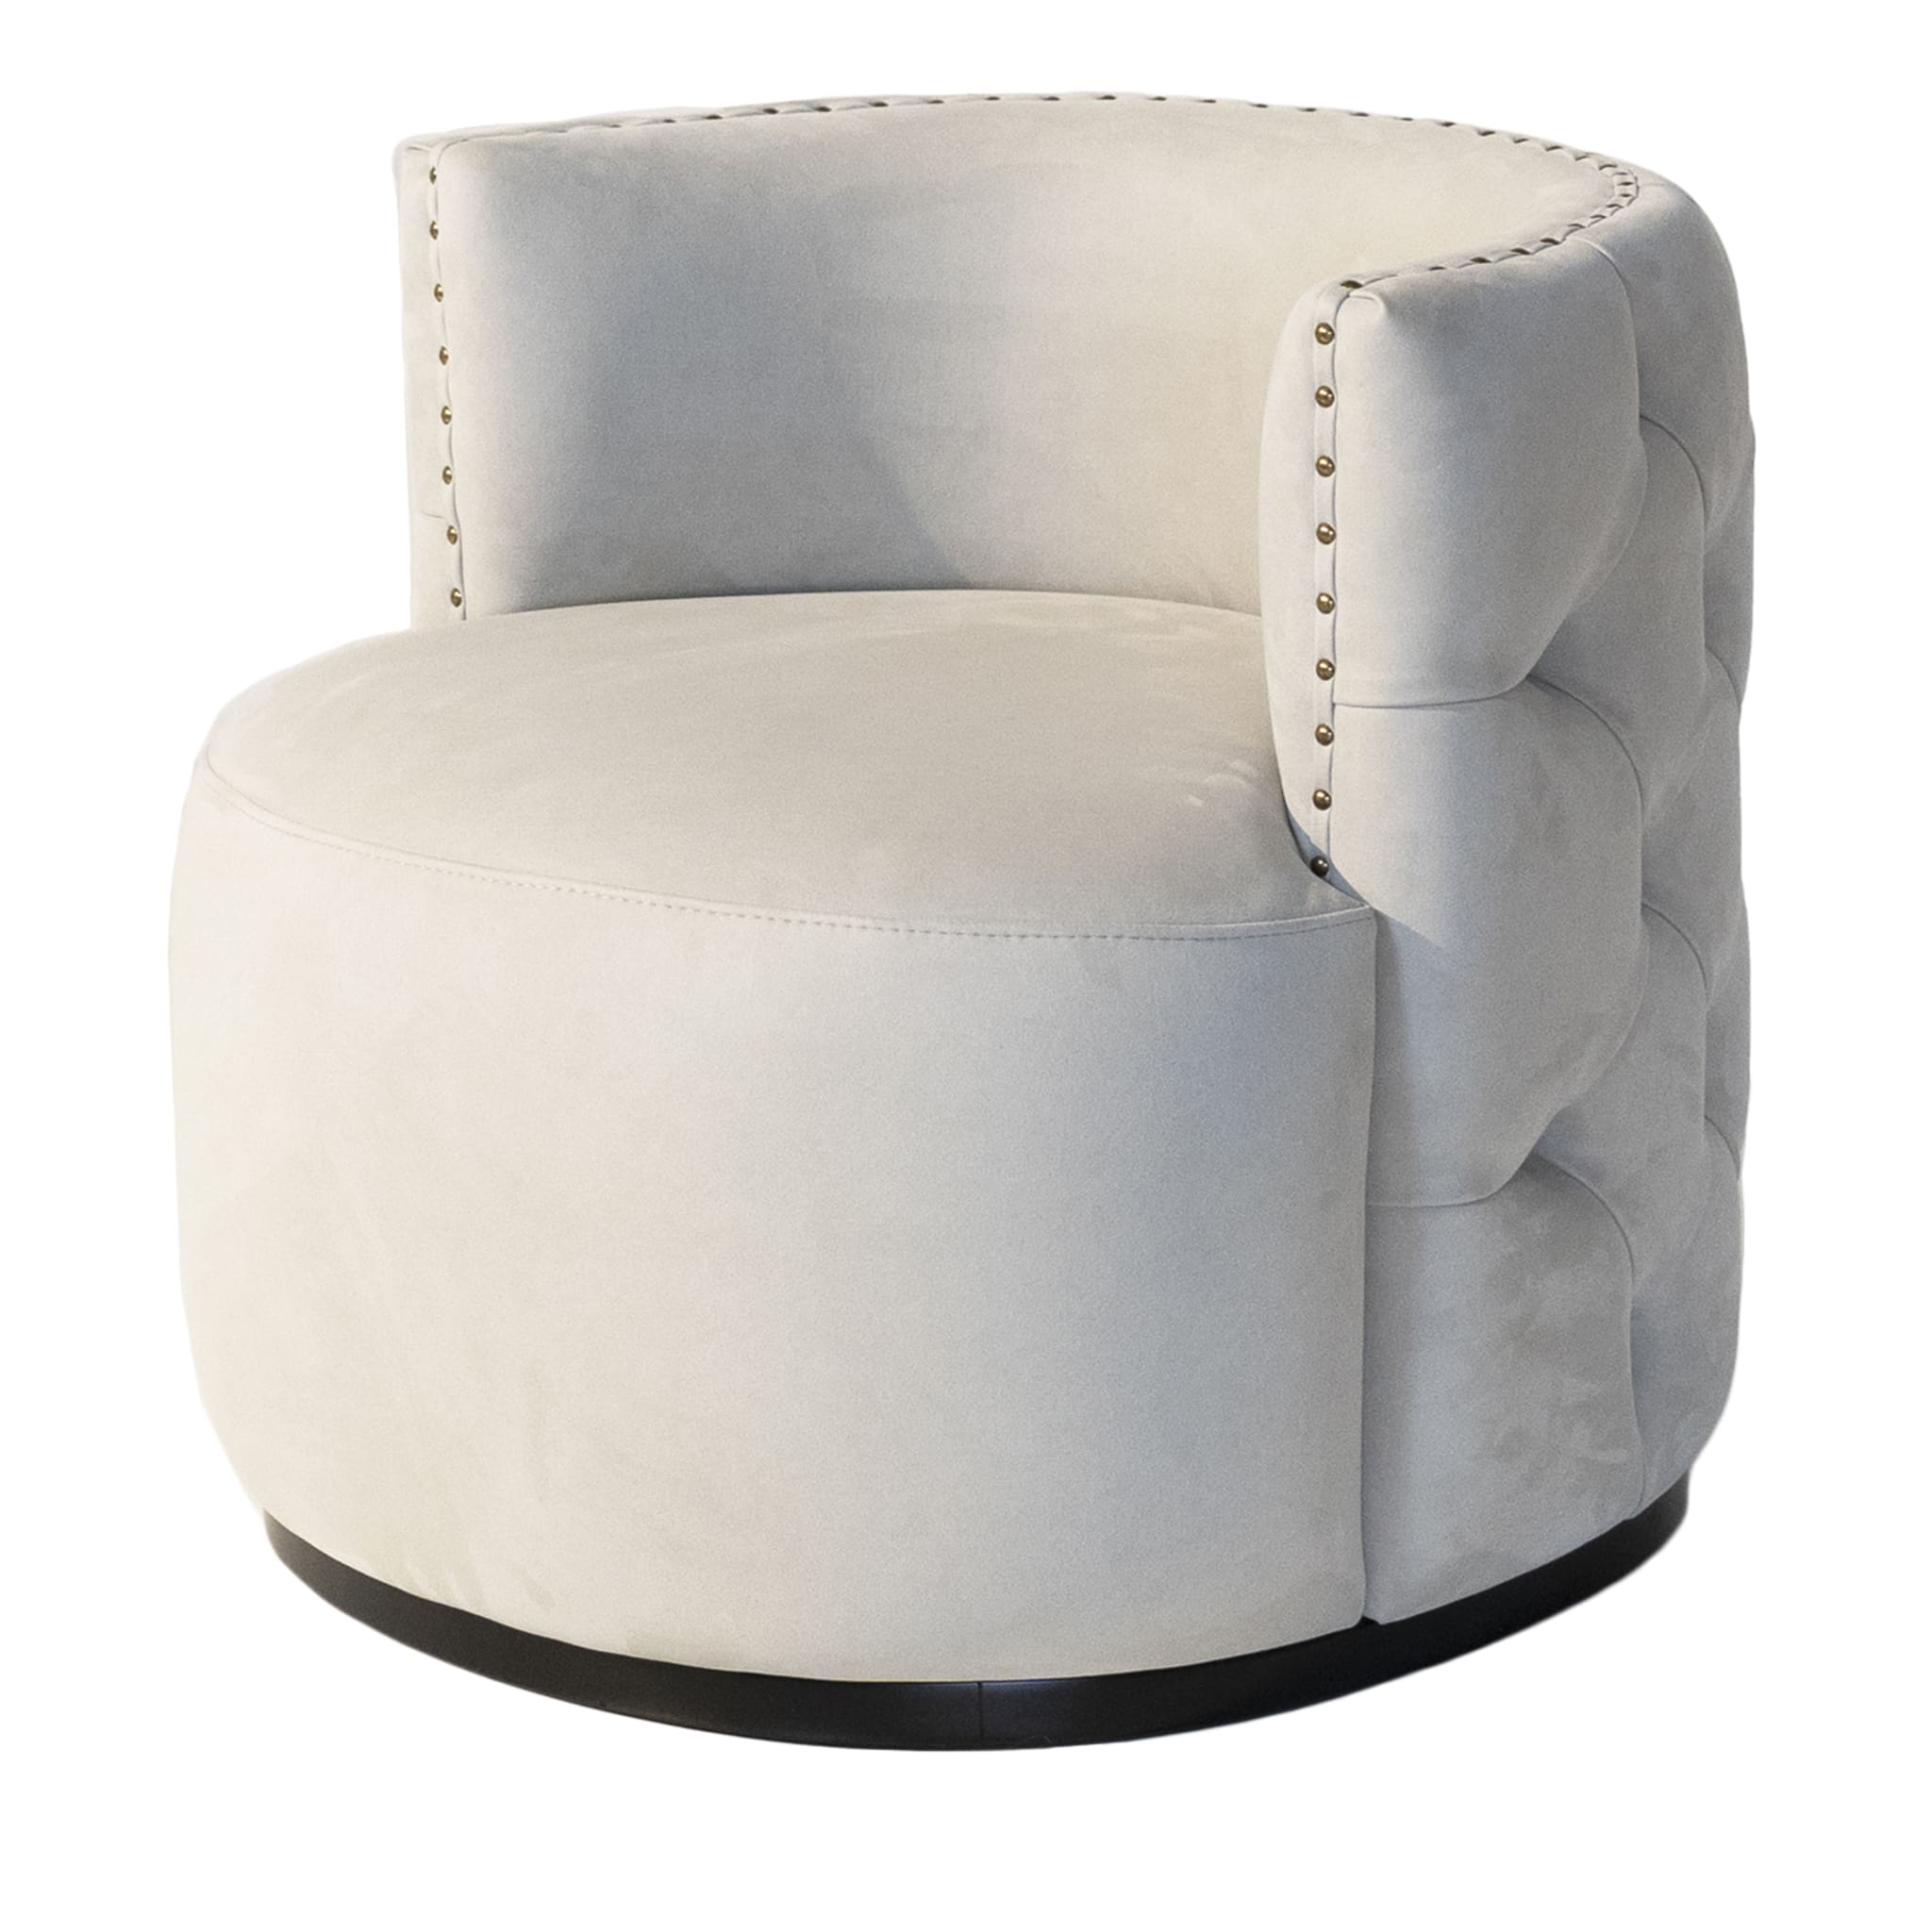 Petra Armchair by Marco and Giulio Mantellassi - Main view